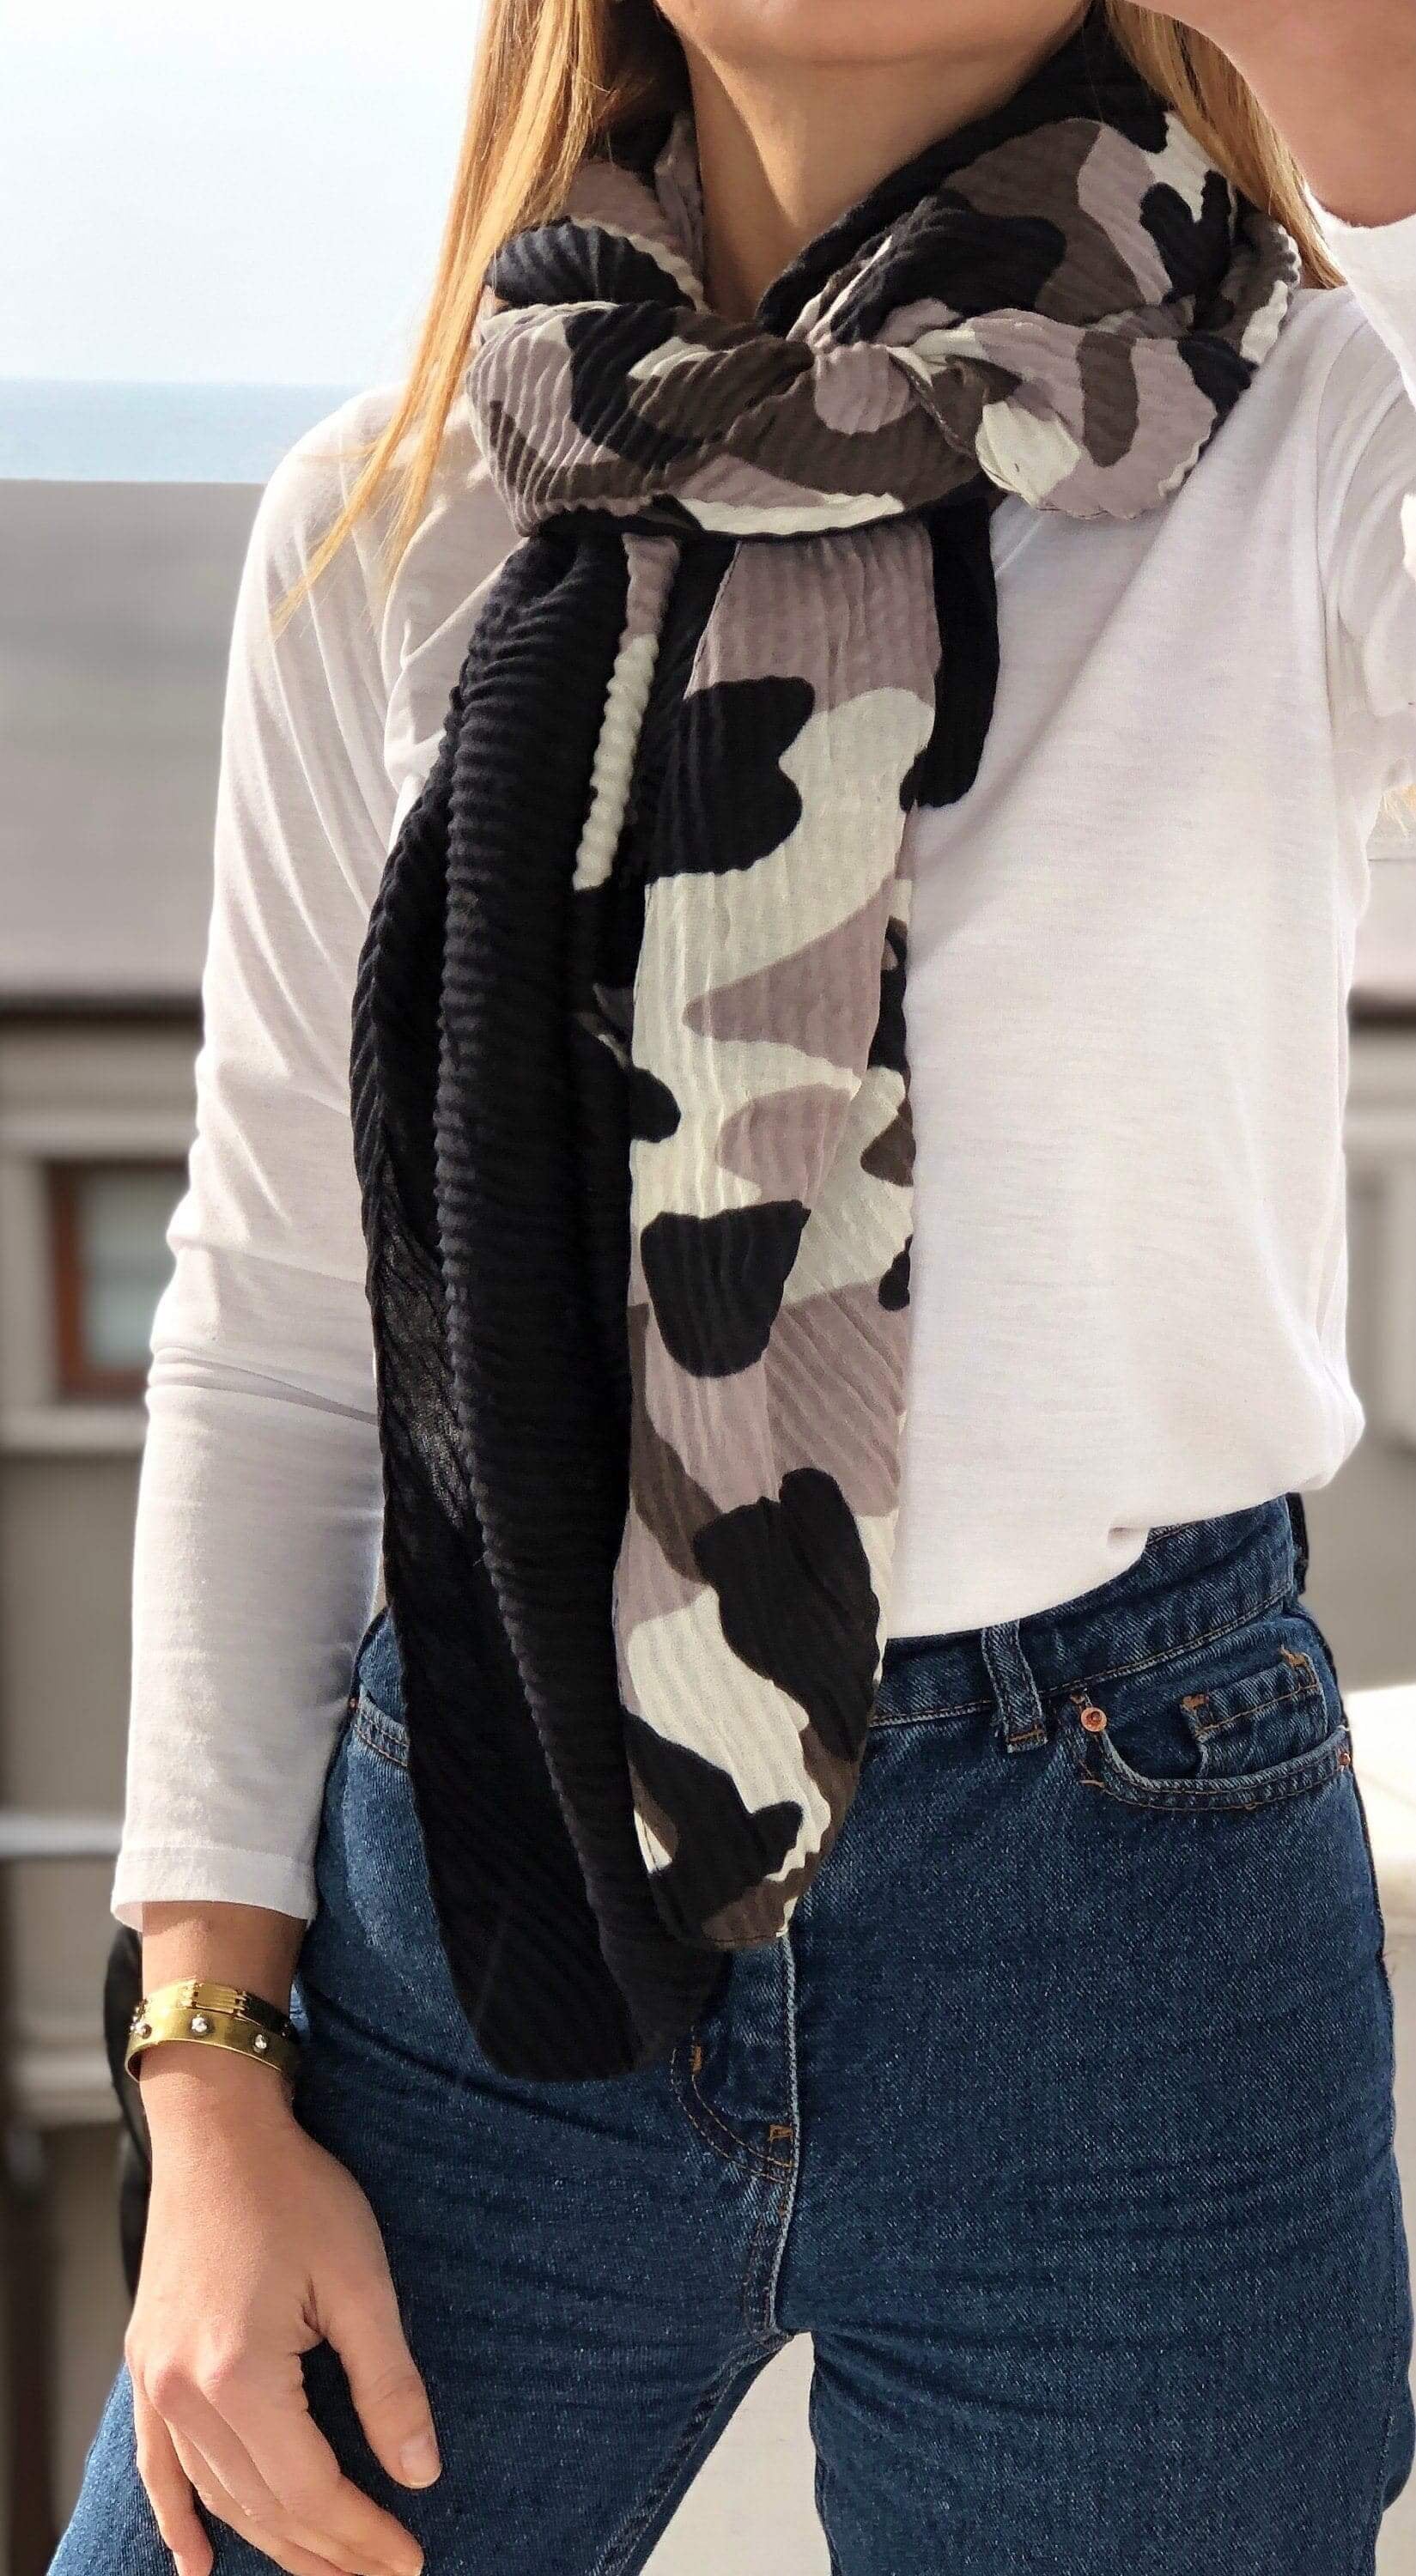 Rectangle scarf in a stylish grey, black, and white camouflage pattern.